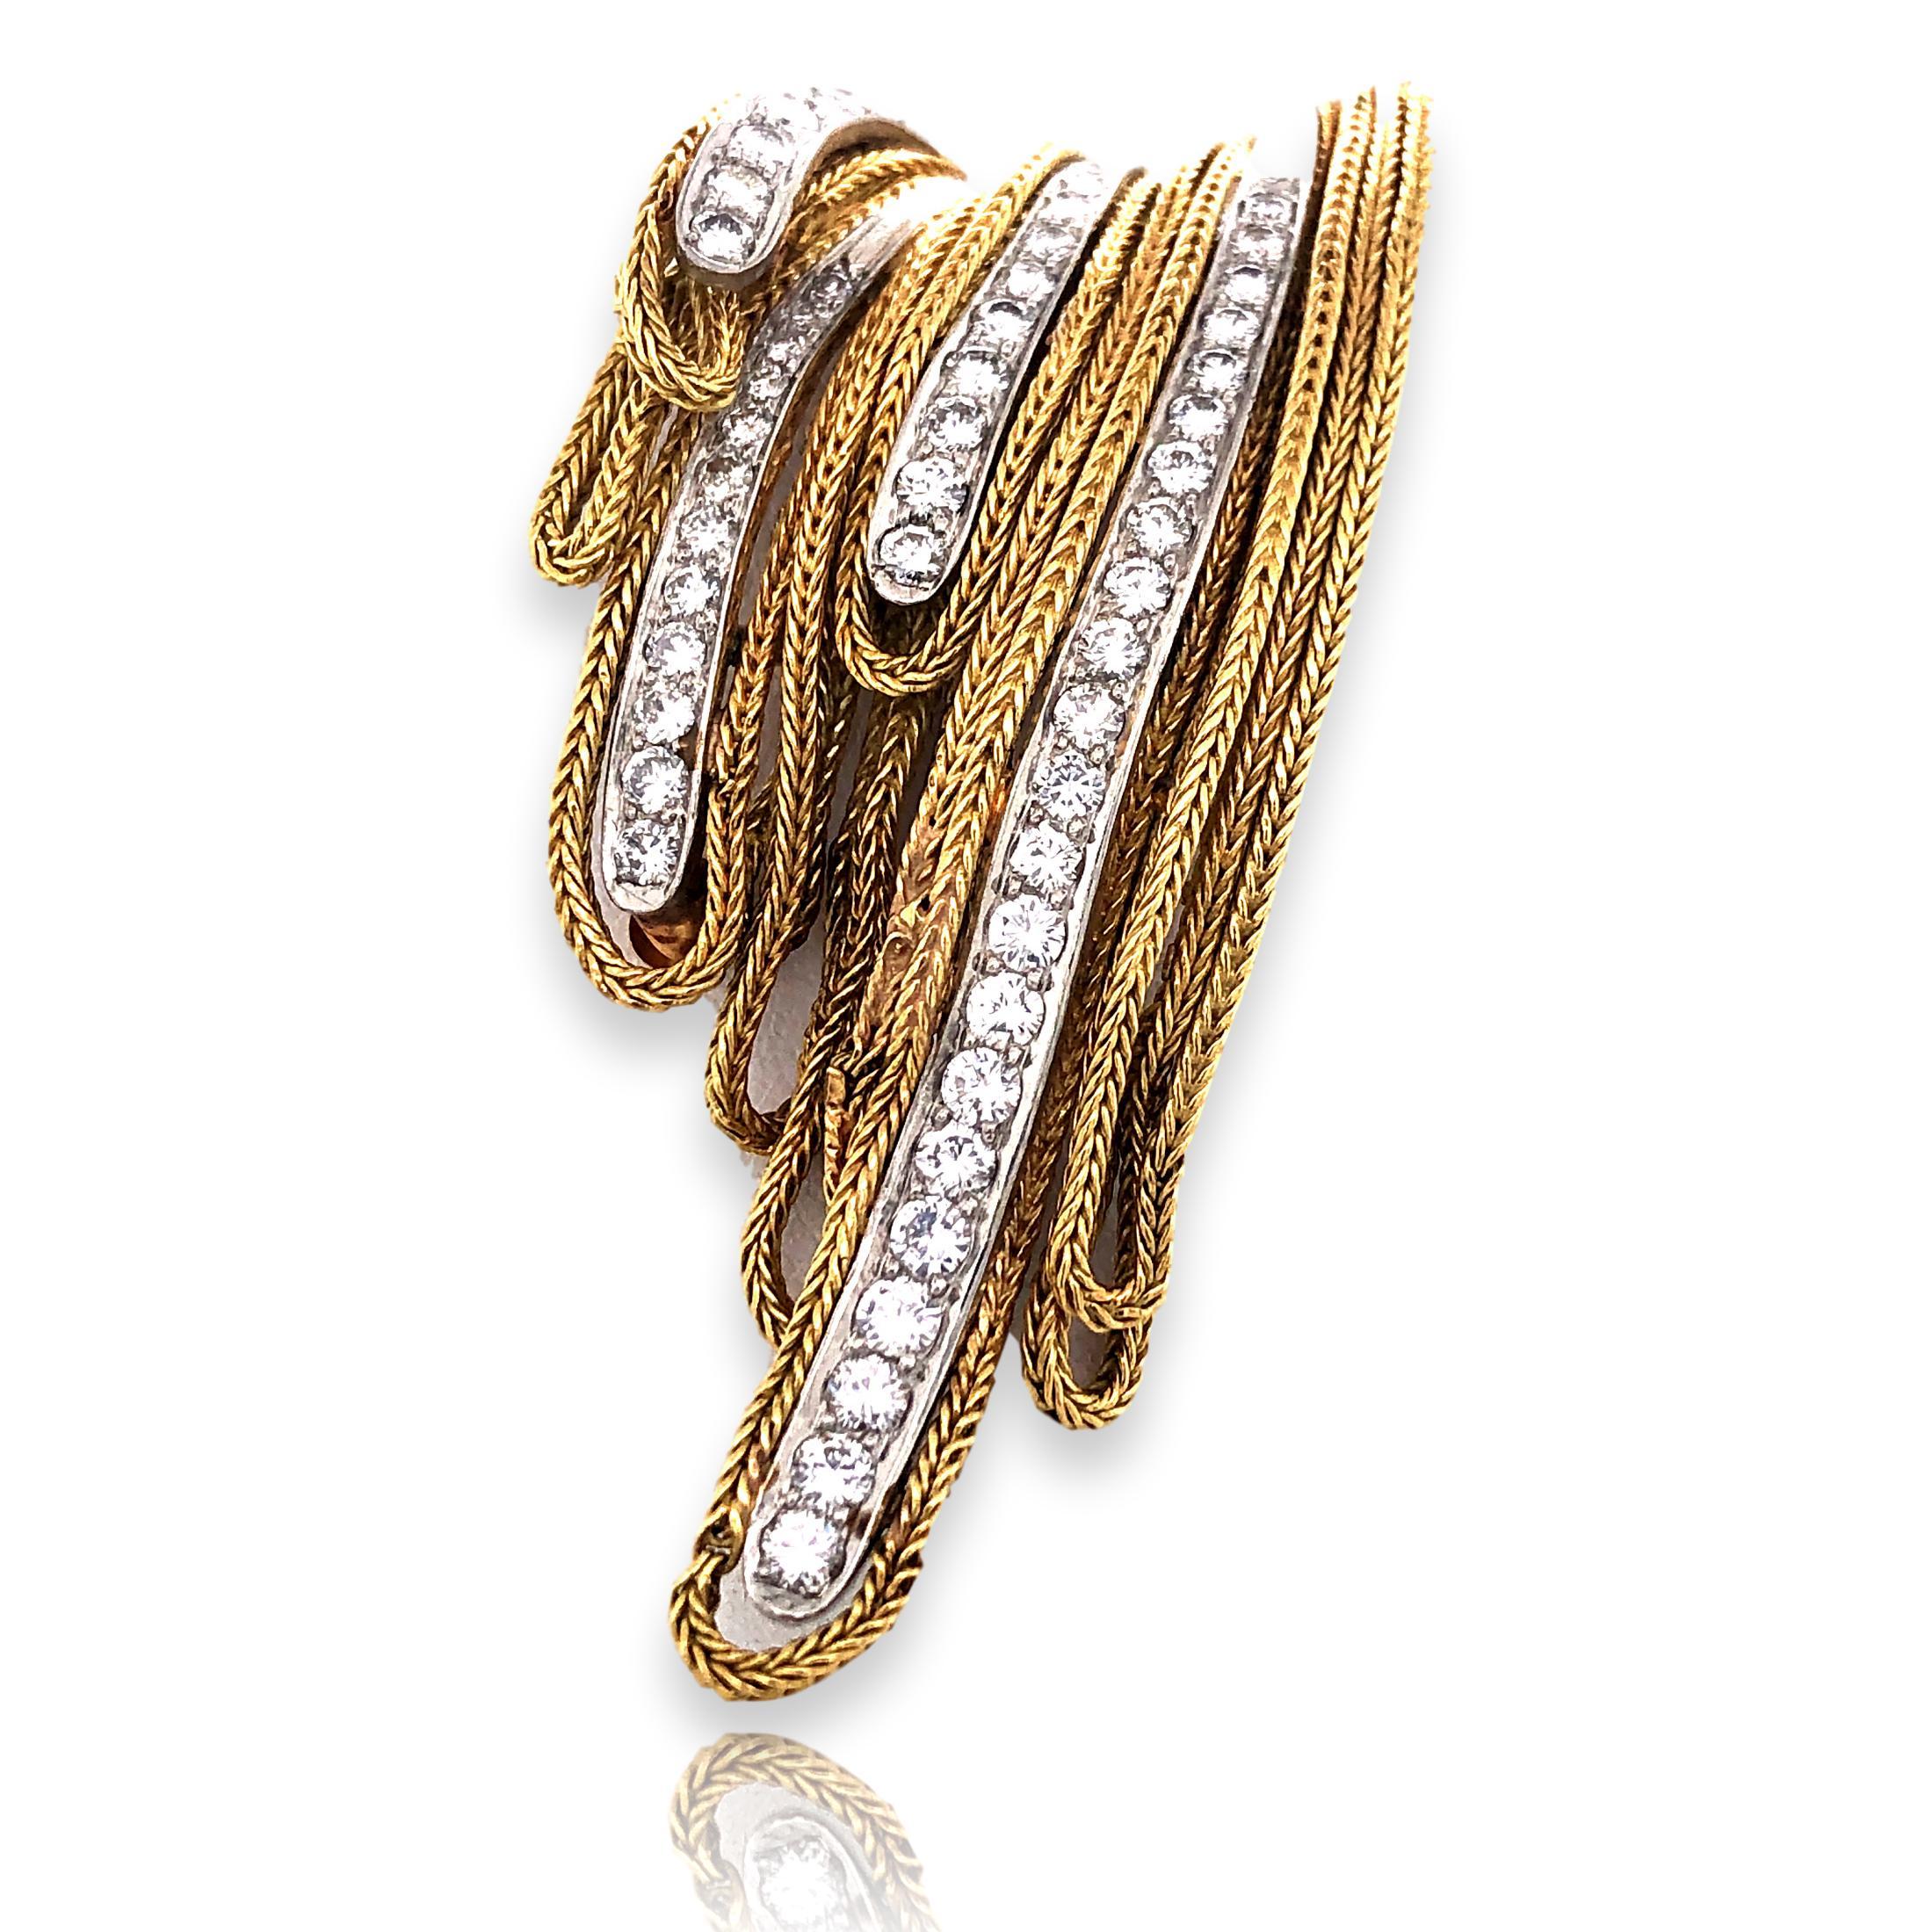 Gold and diamond French made brooch. The 18k yellow gold 2 3/8